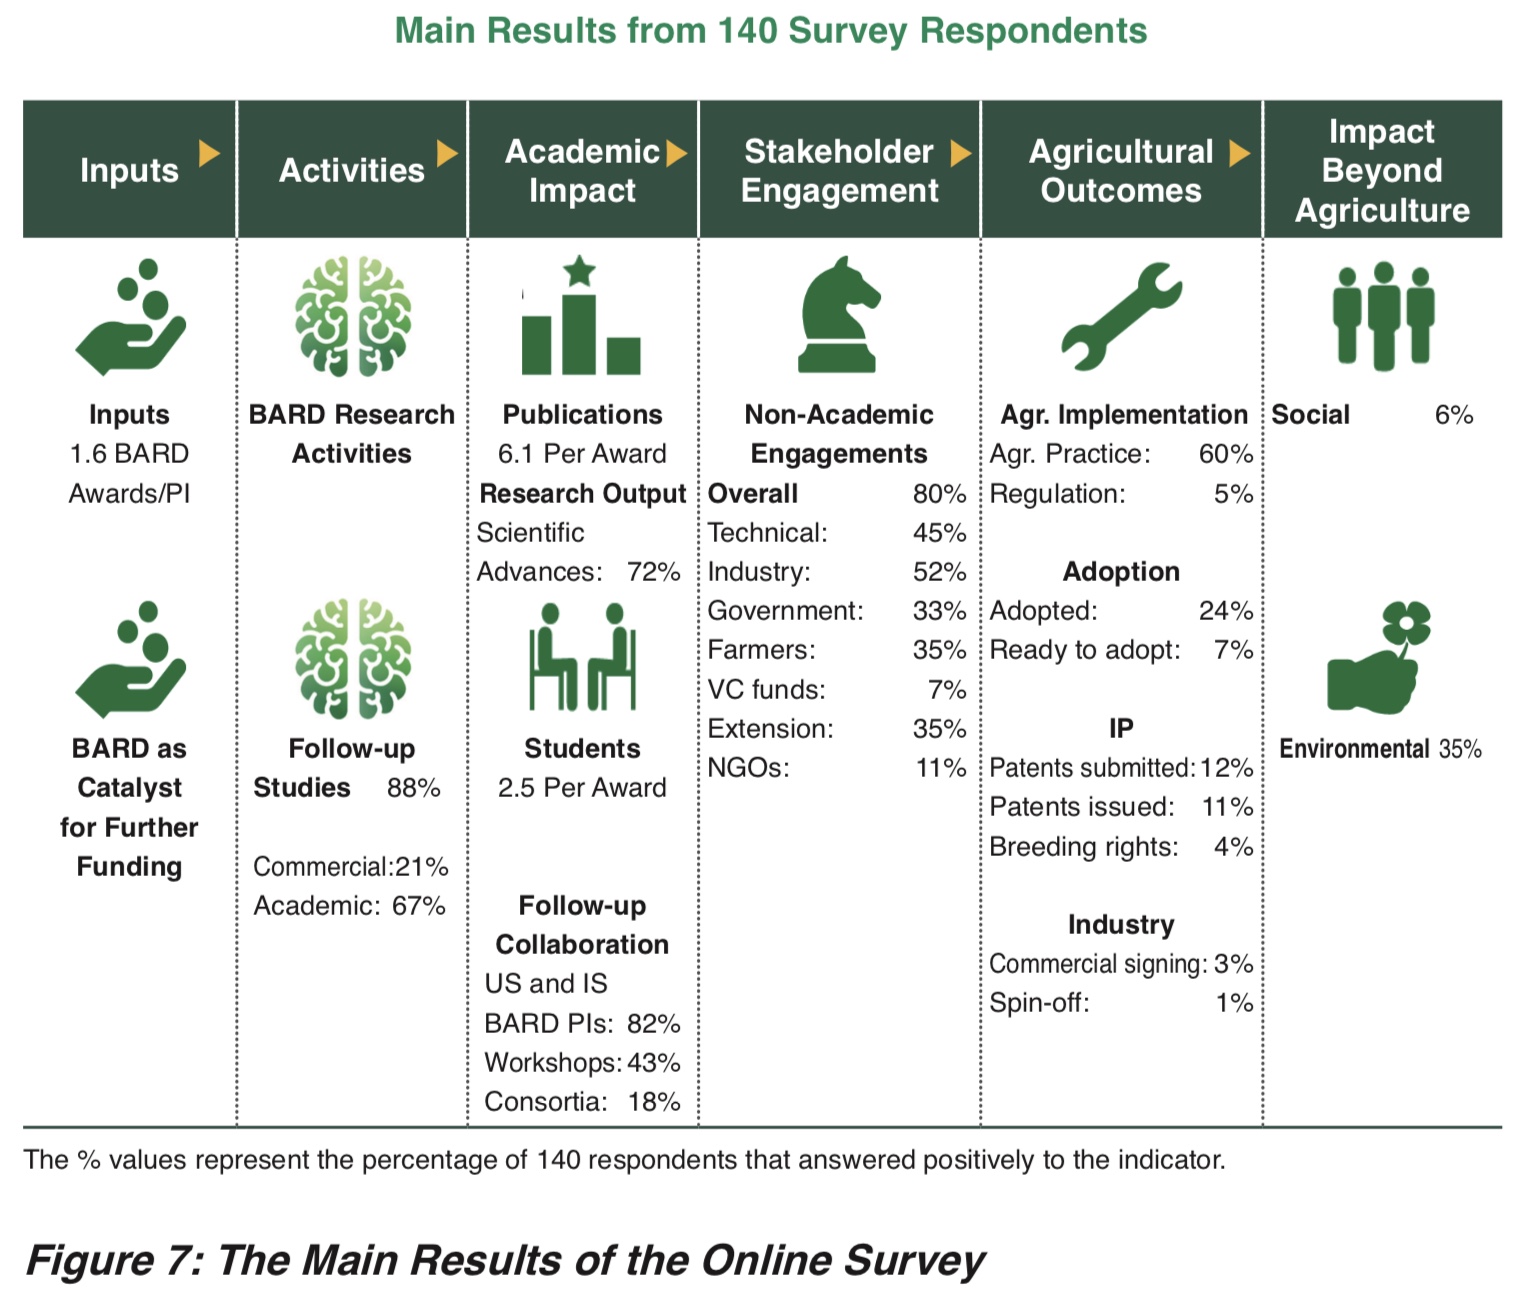 Figure 7: The Main Results of the Online Survey